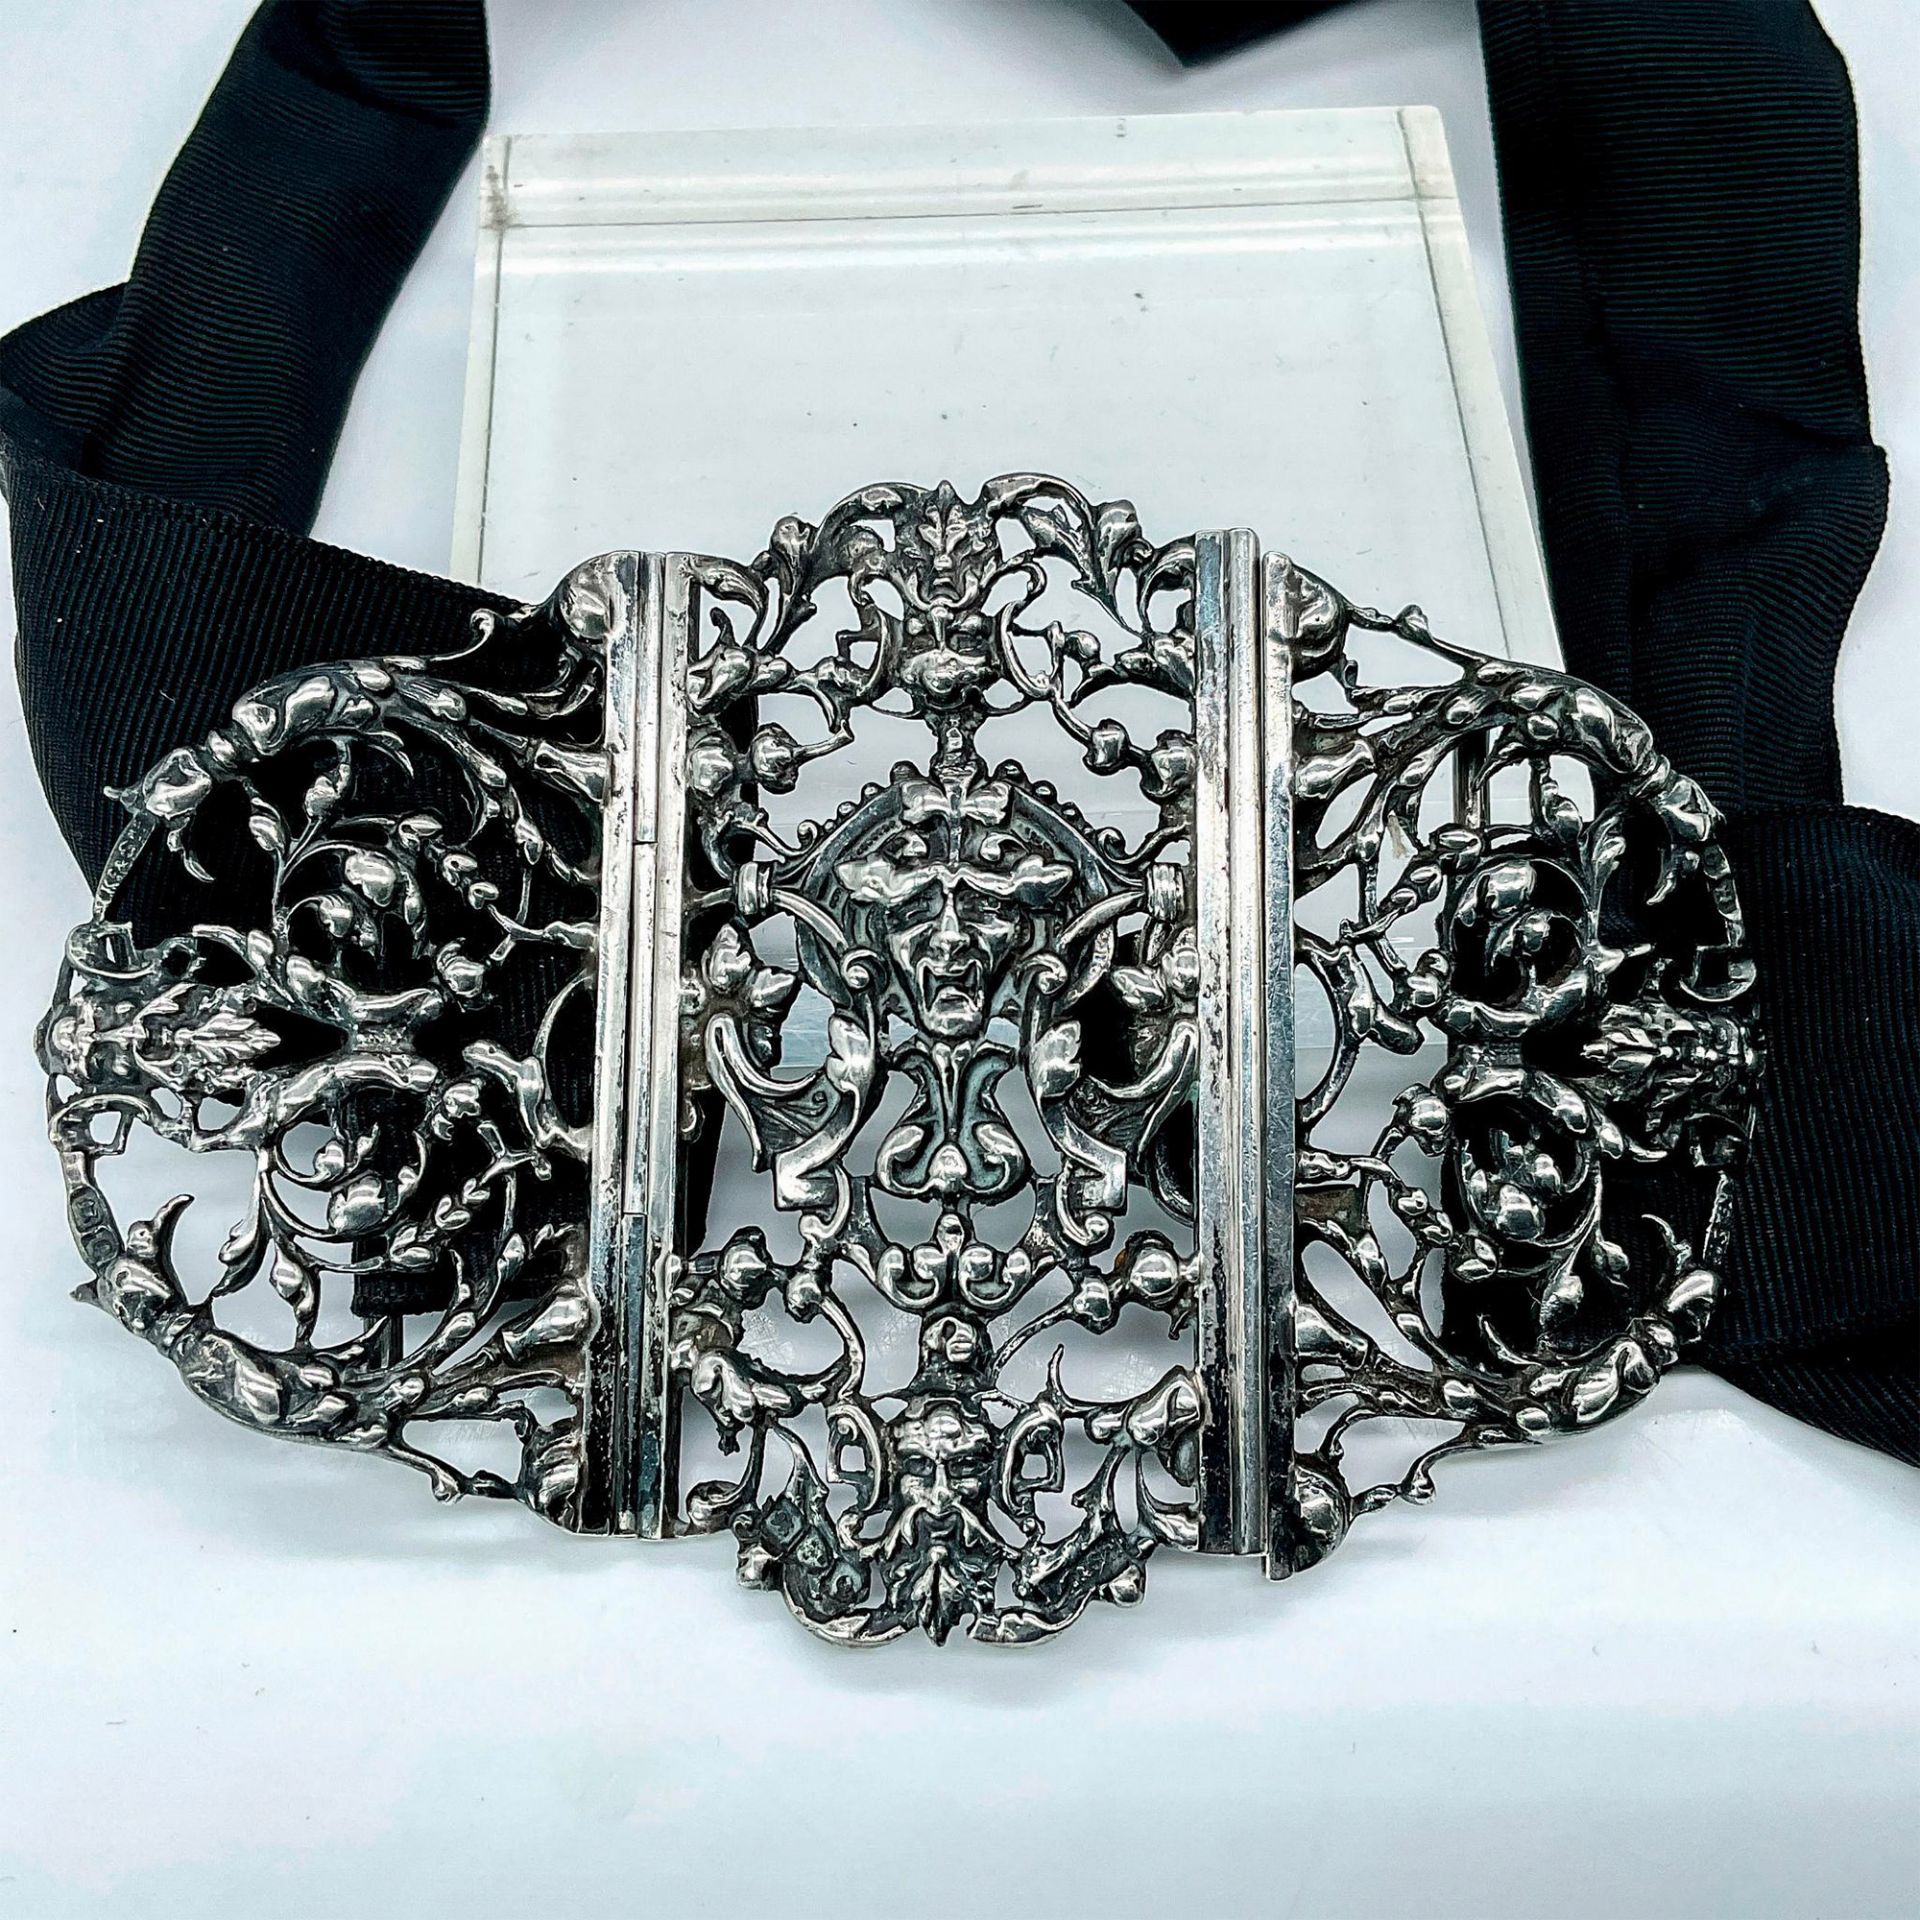 Antique Silver Victorian Mourning Belt & Buckle - Image 3 of 3